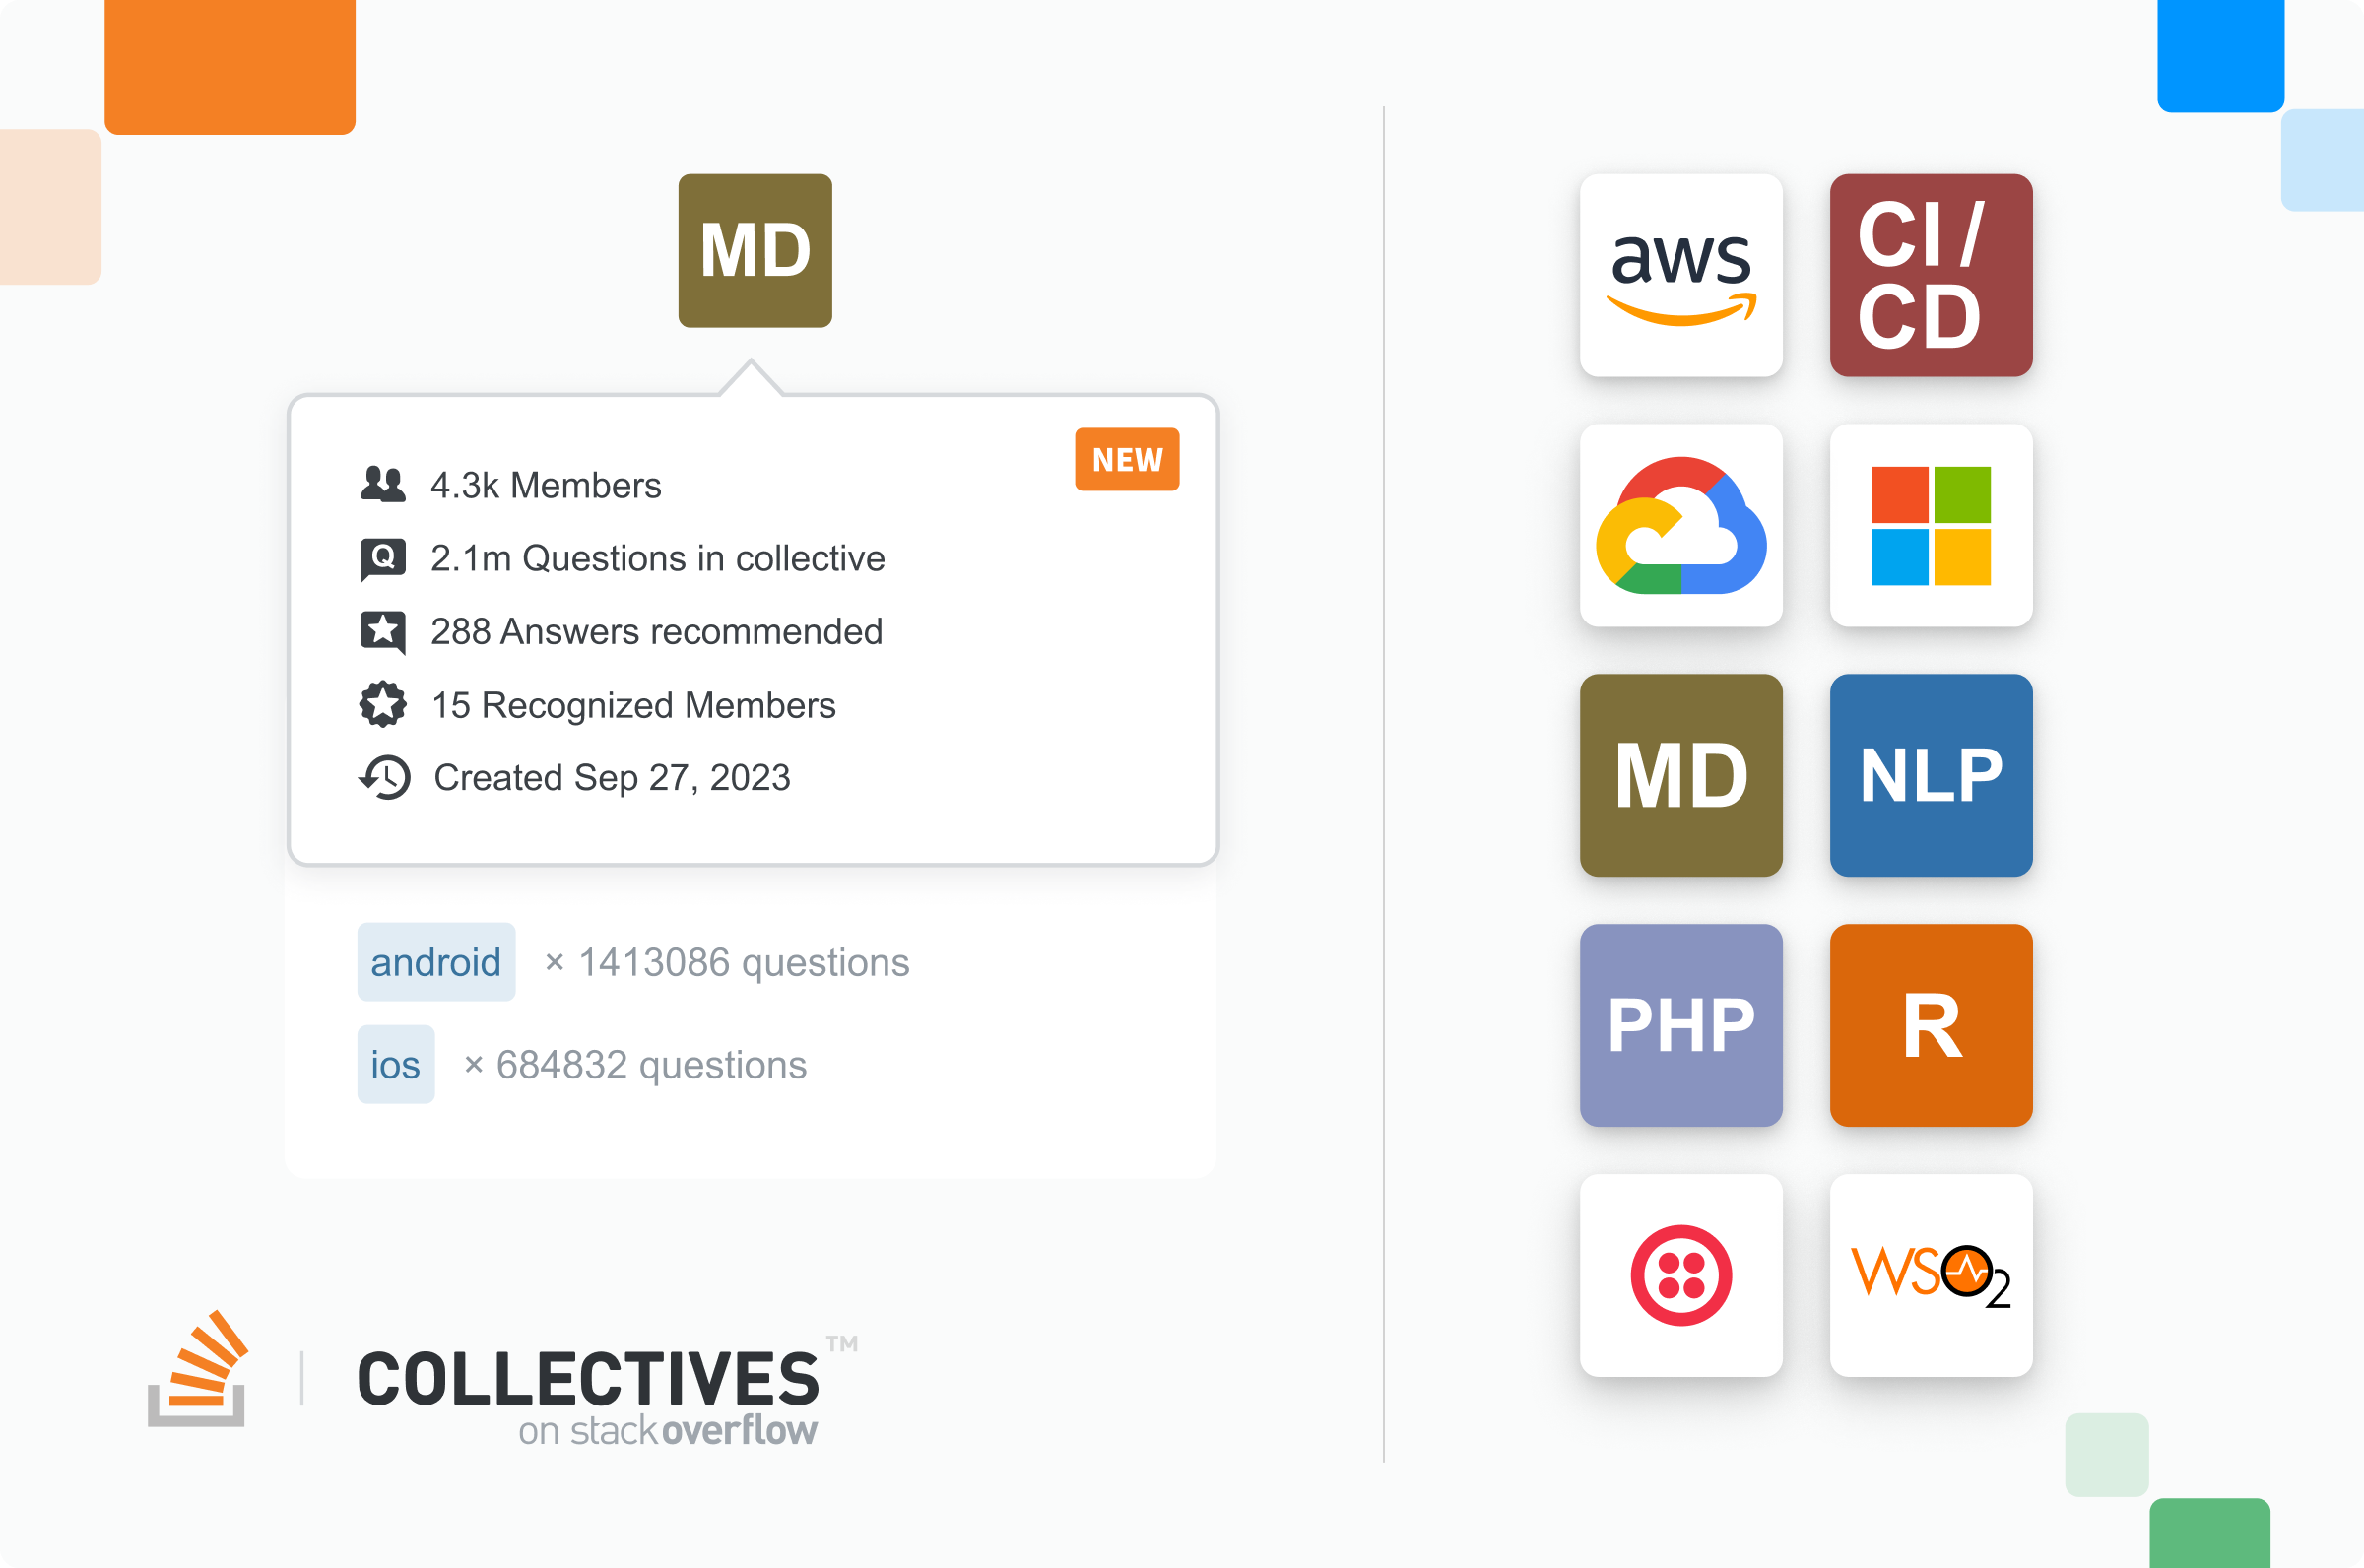 Highlights the Collectives on Stack overflow, including AWS, Google Cloud, Twilio, CI/CD, NLP, and more.